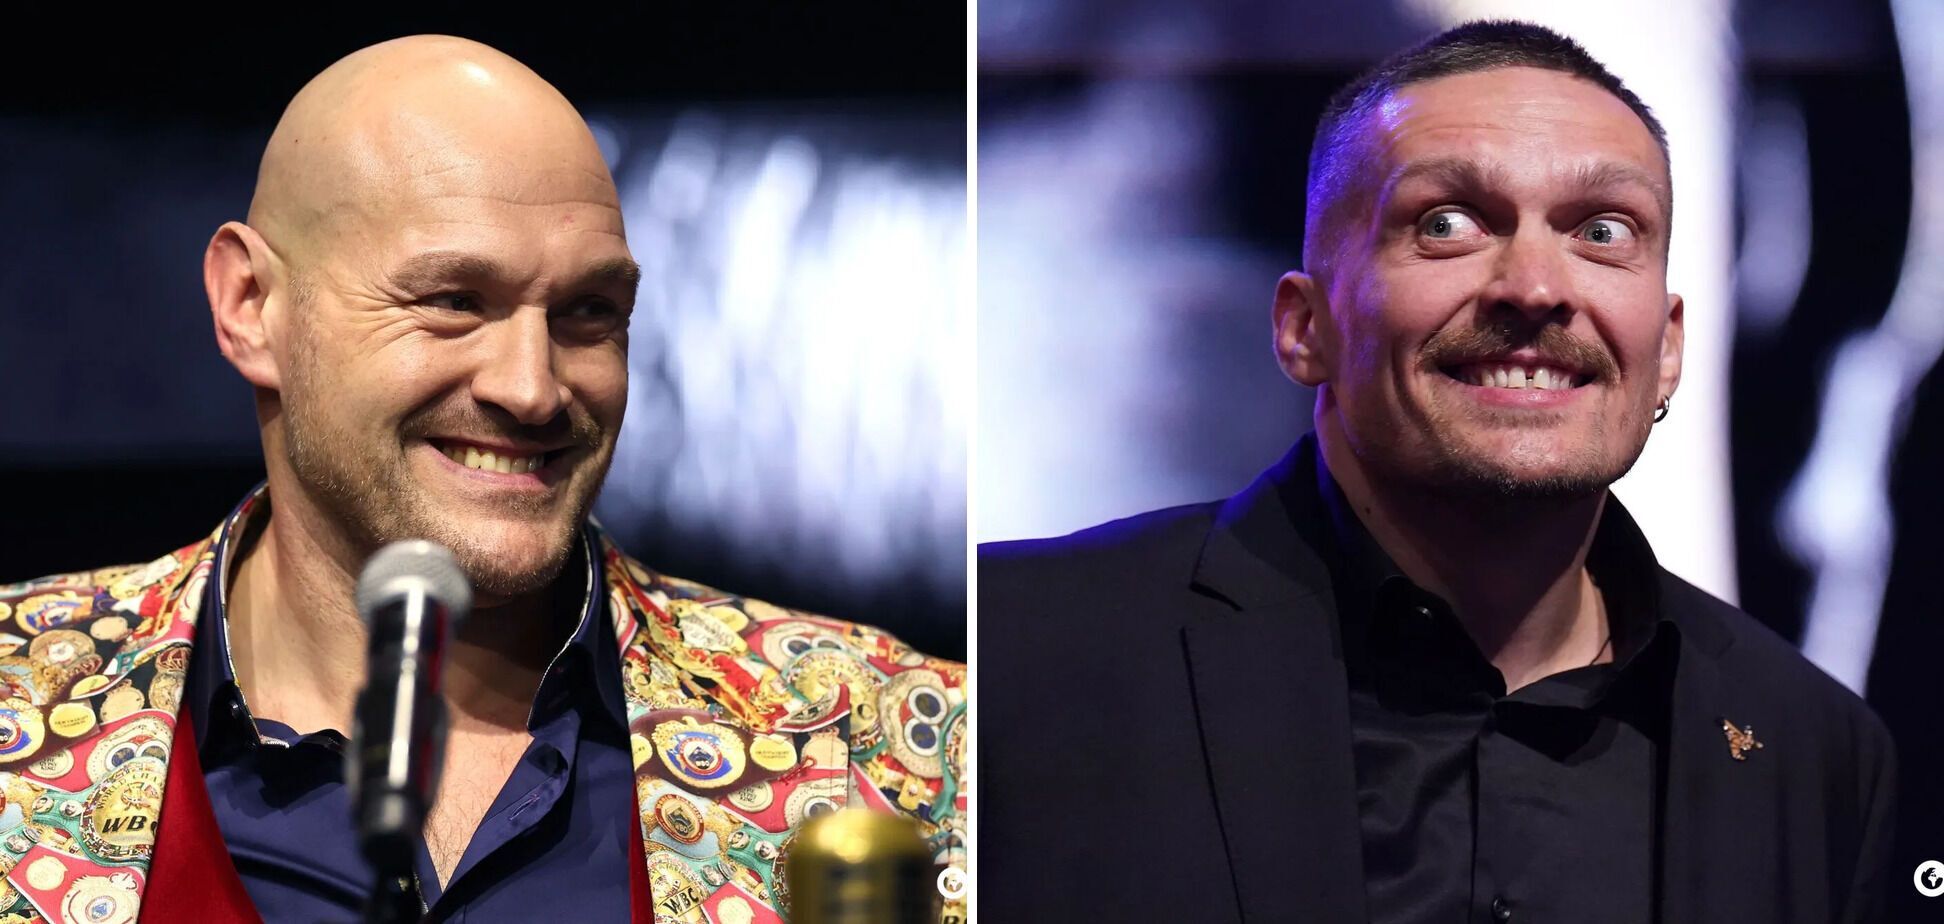 Will receive a bomb. Information has emerged about what will happen in the Usyk-Fury fight on May 18